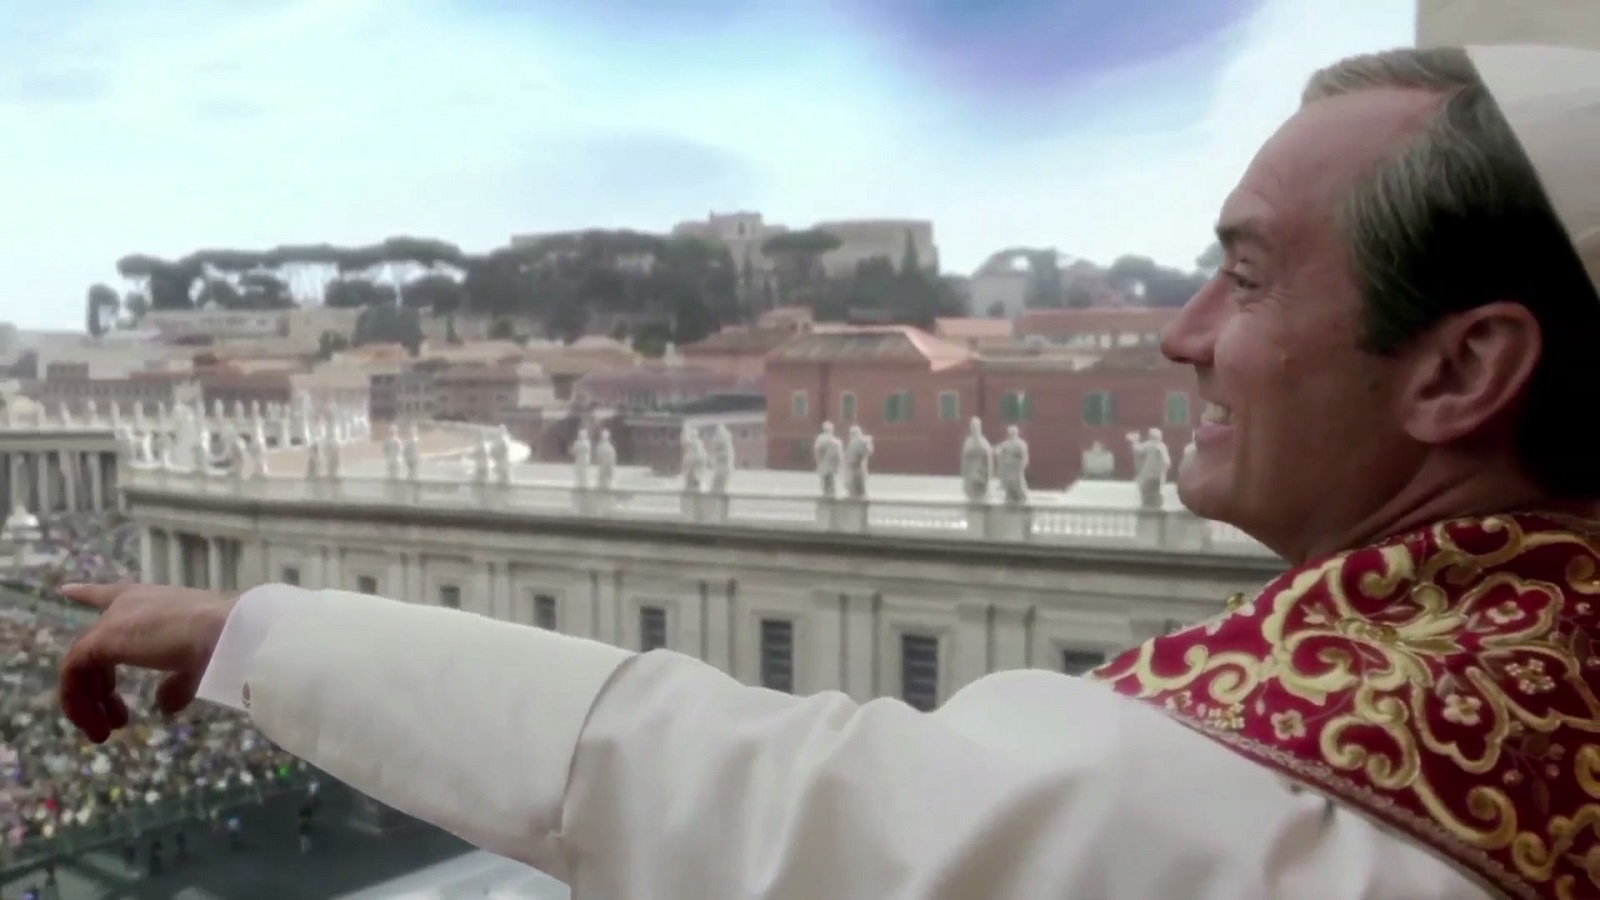 TBT: Young Pope Trolls People's Posts on Social Media